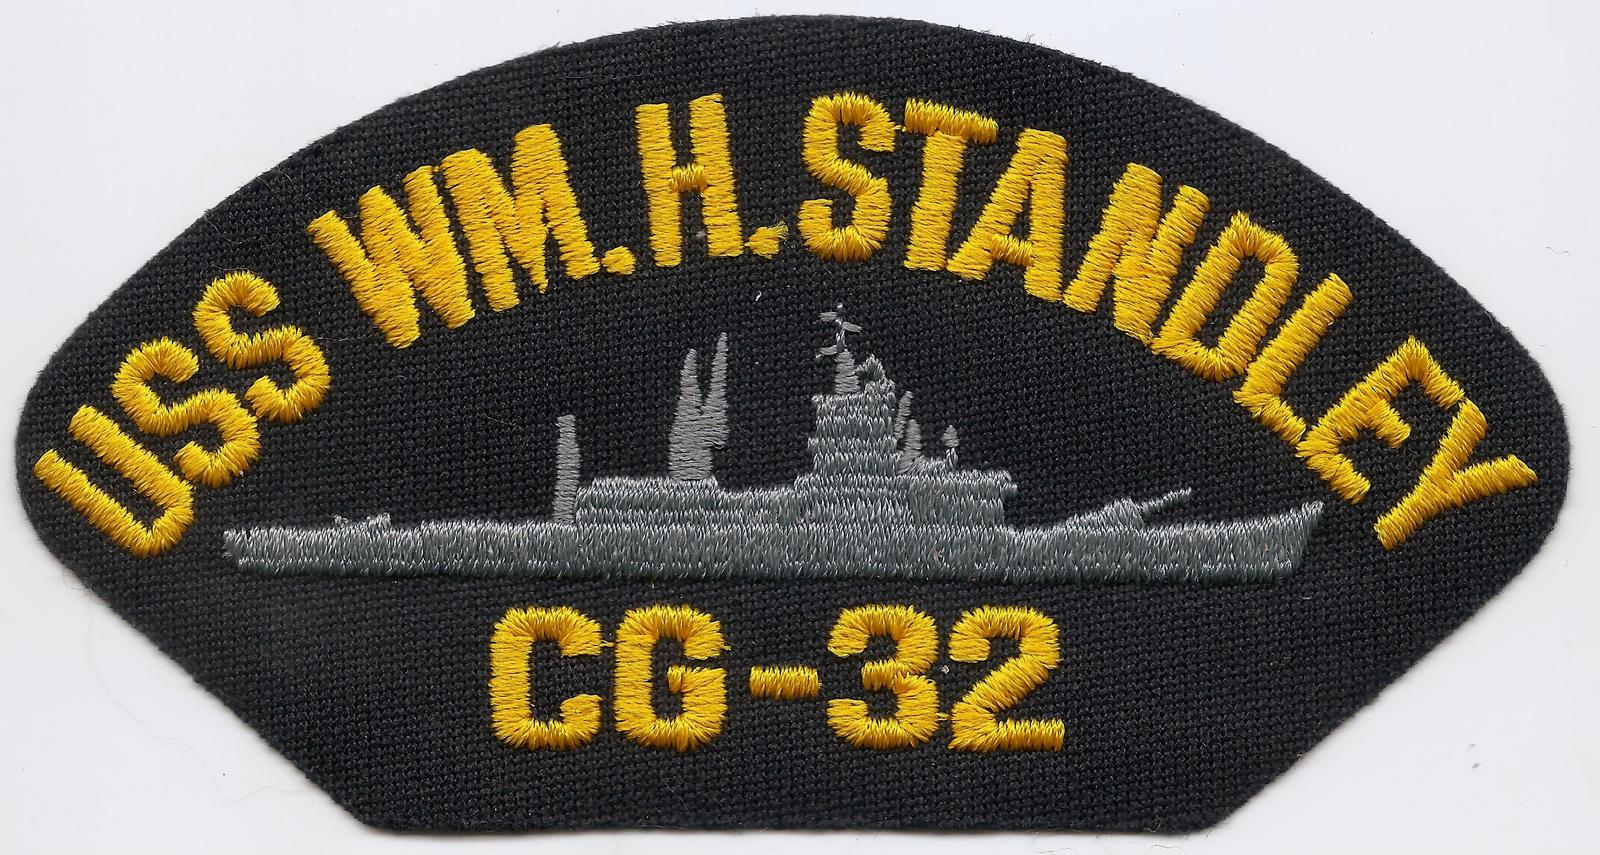 Primary image for Vintage USS Wm. H. Standley CG-32 (Cruiser) 5 3/4" Embroidered Souvenir Patch